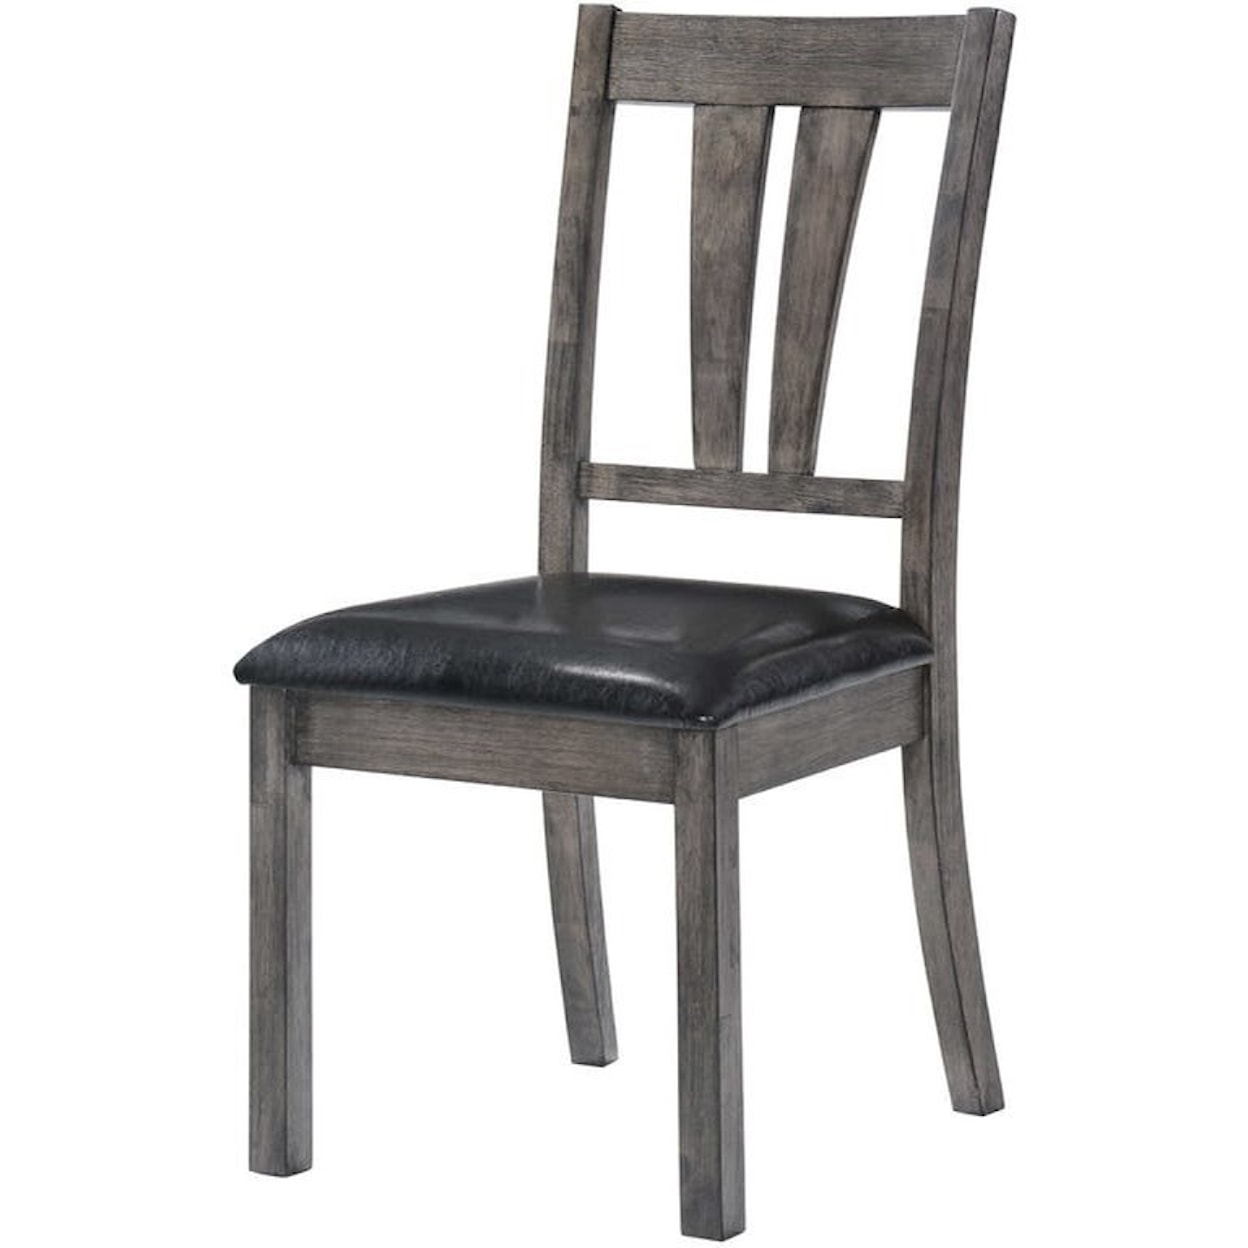 Elements International Nathan Dining Side Chair